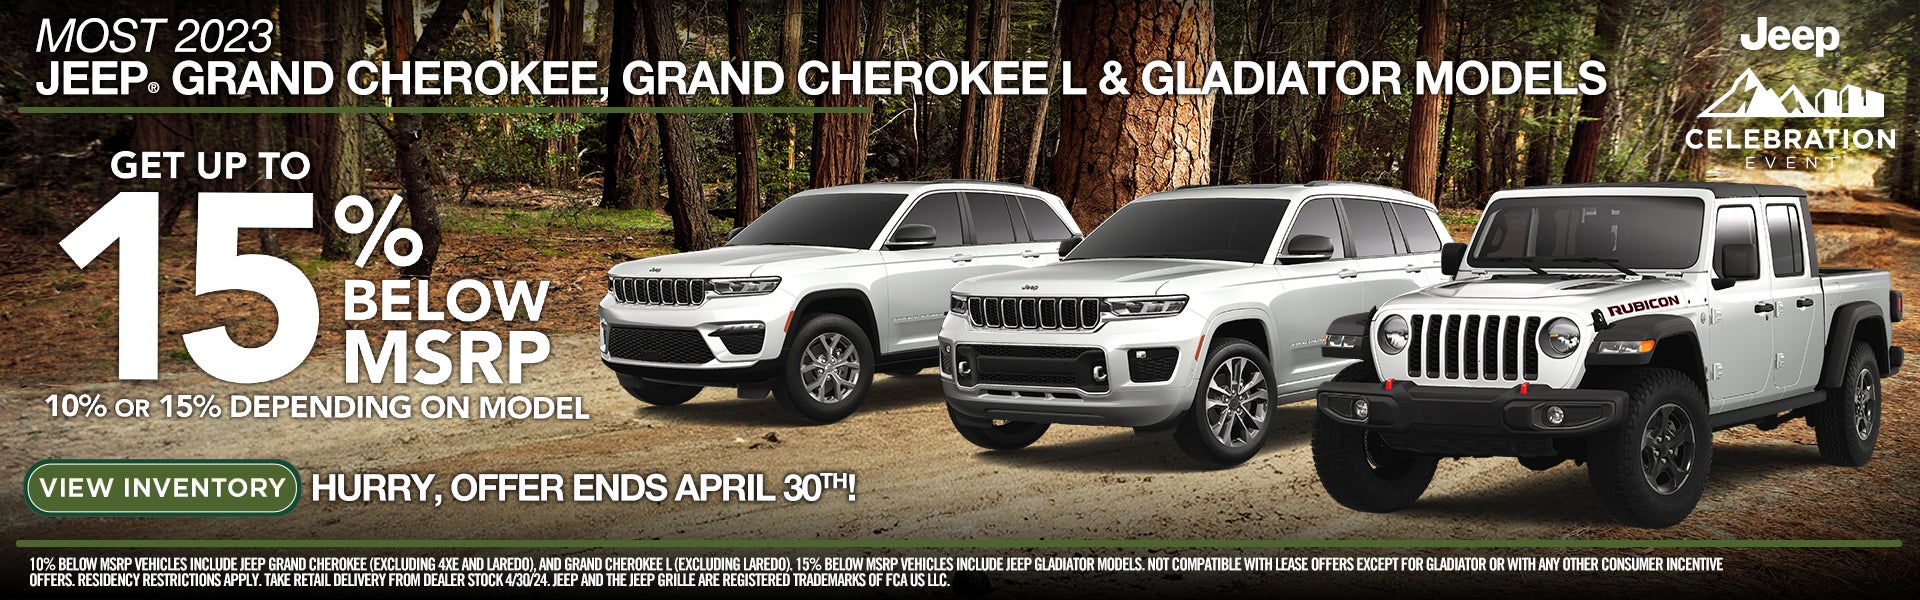 Get up to 15% Off Below MSRP for Most 2023 Jeep Grand Cherok